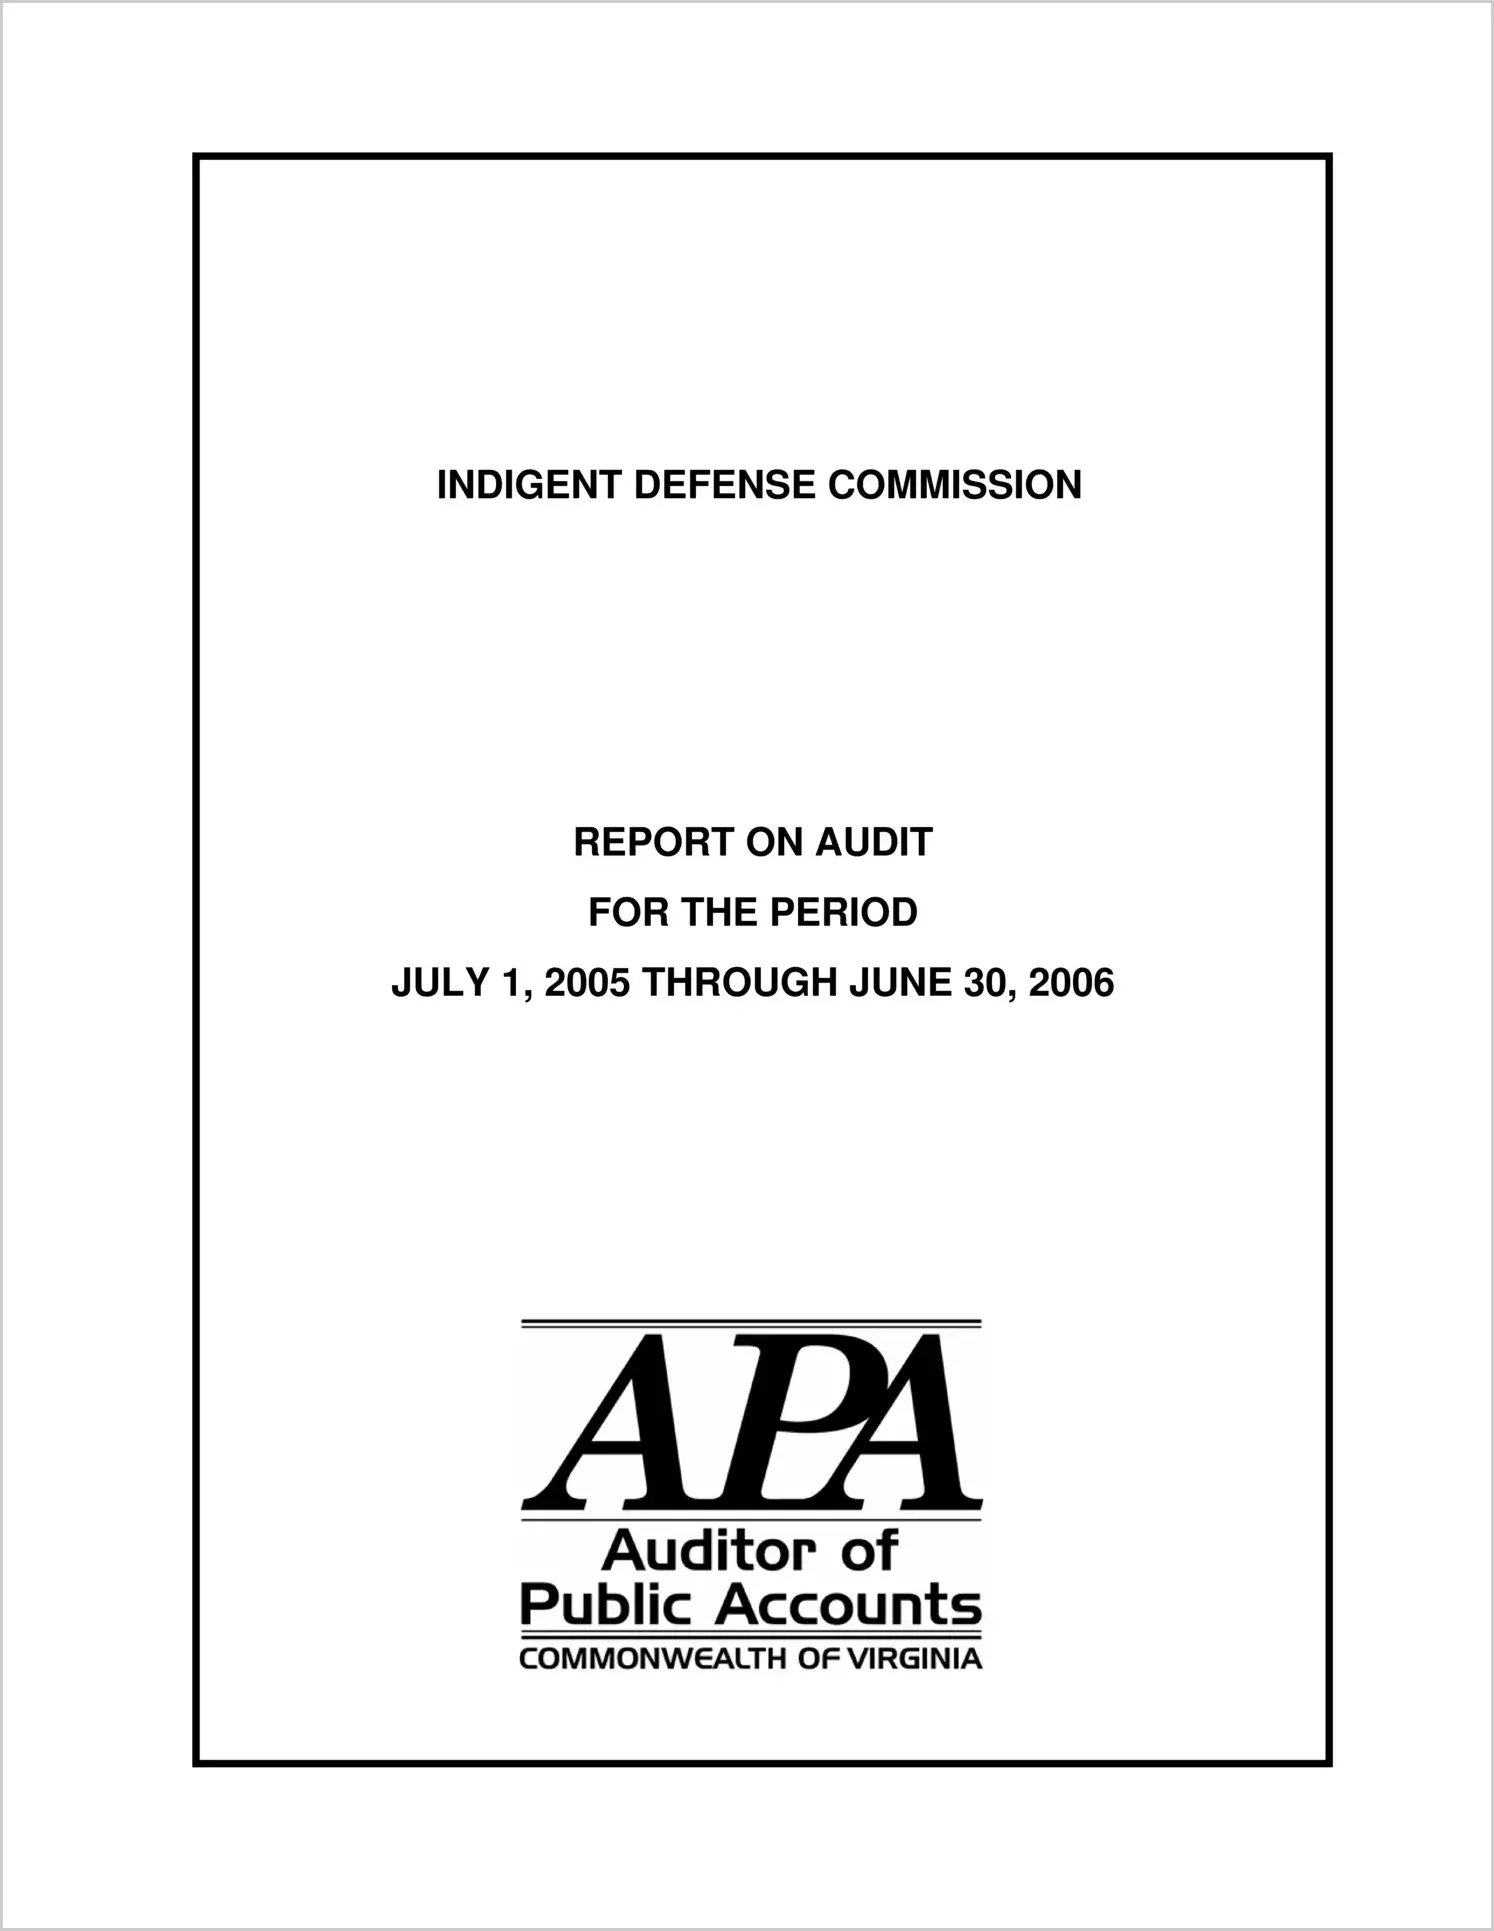 Indigent Defense Commission for the period July 1, 2005 through June 30, 2006